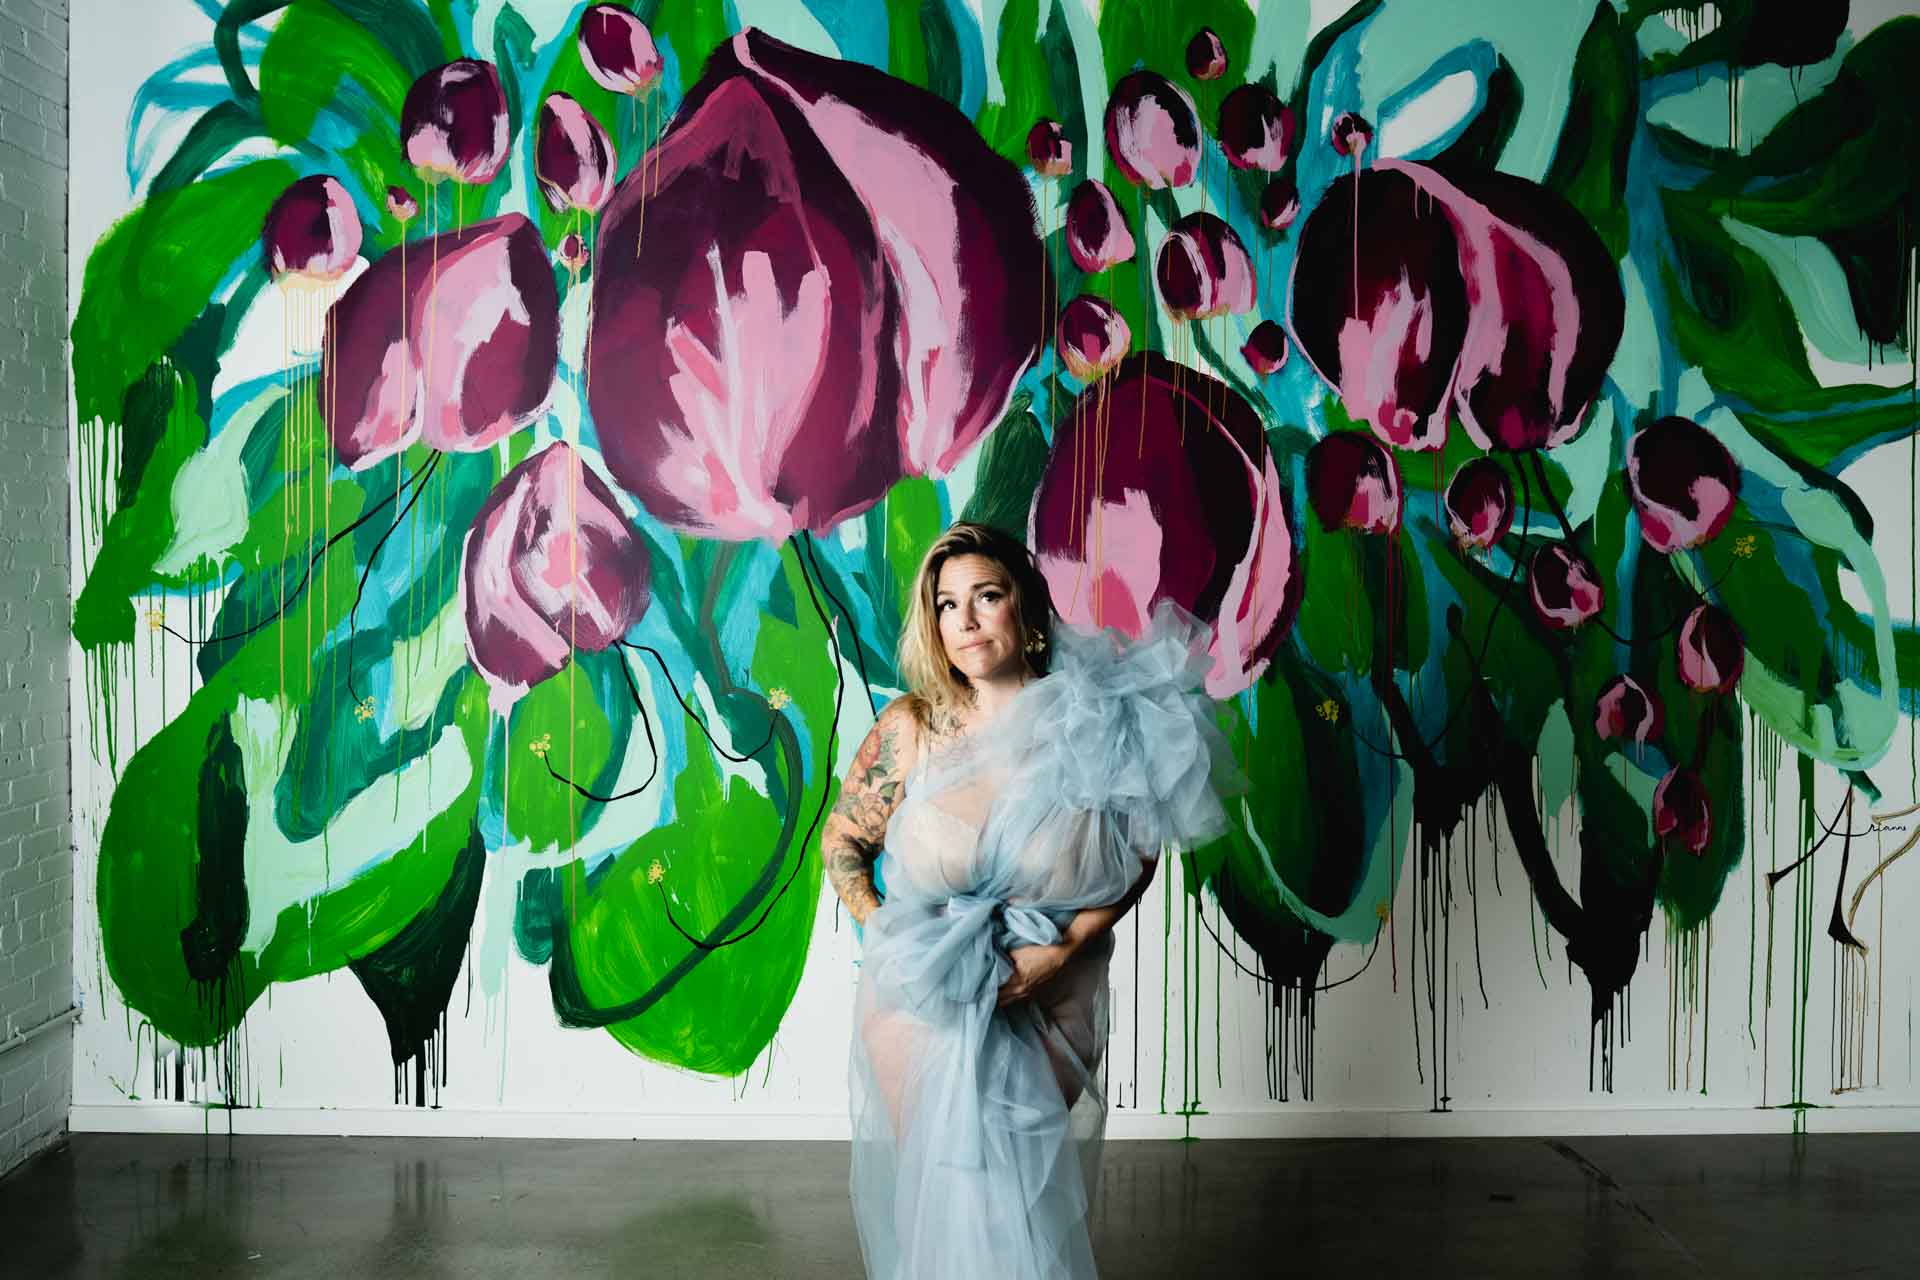 Jessica Strobel in a gown posed in front of a vibrant floral mural